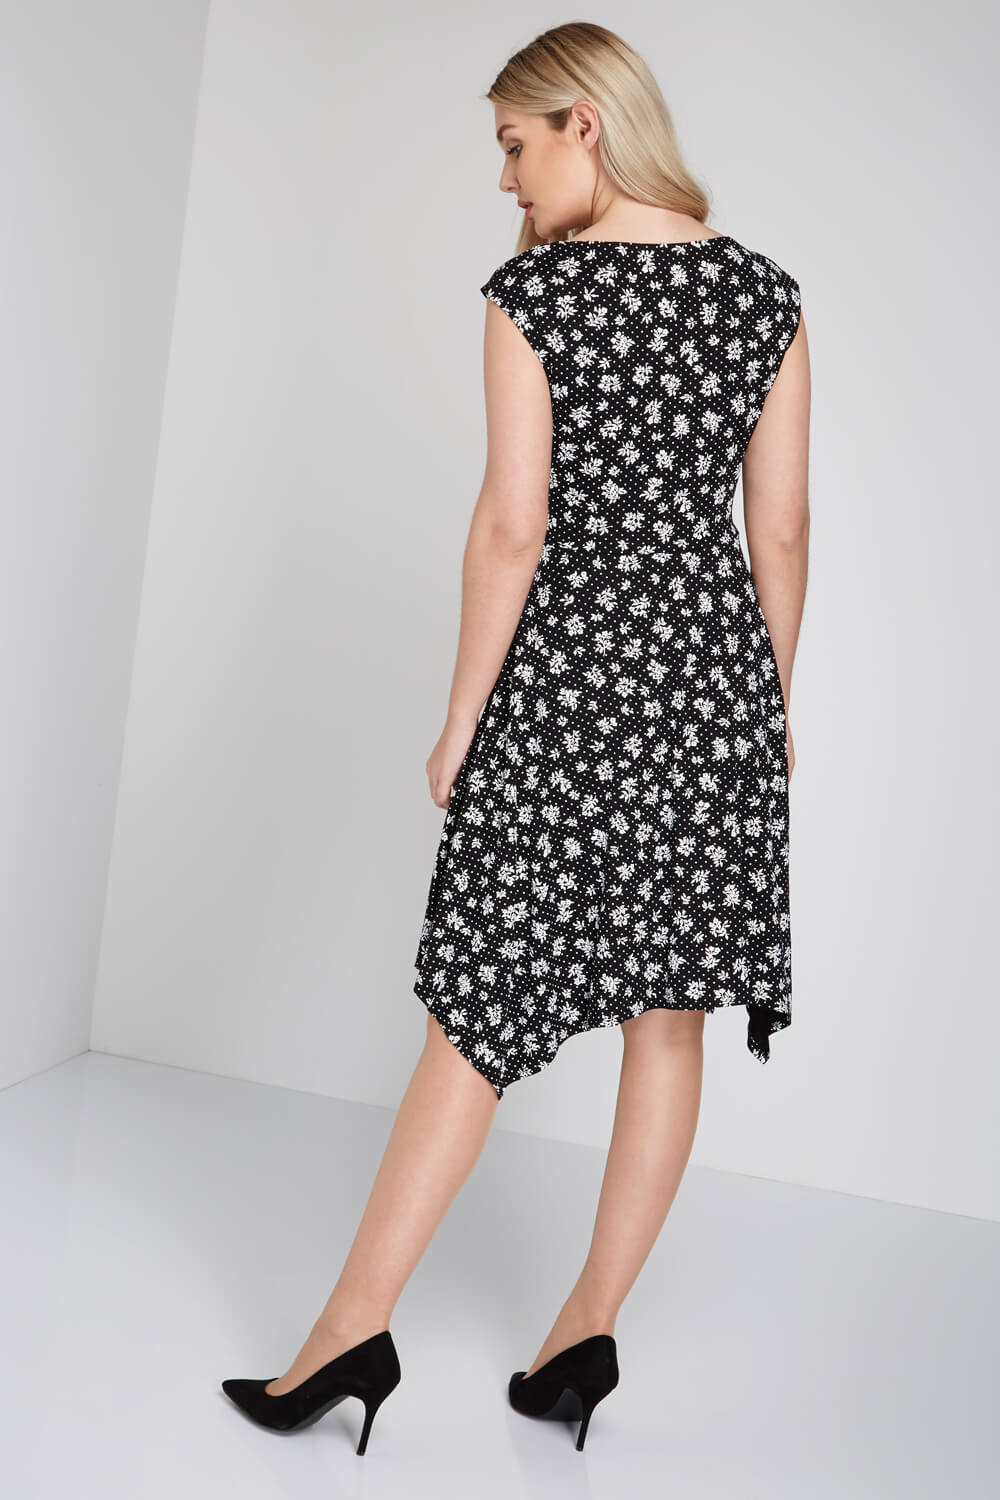 Black Floral Print Fit and Flare Dress, Image 2 of 4